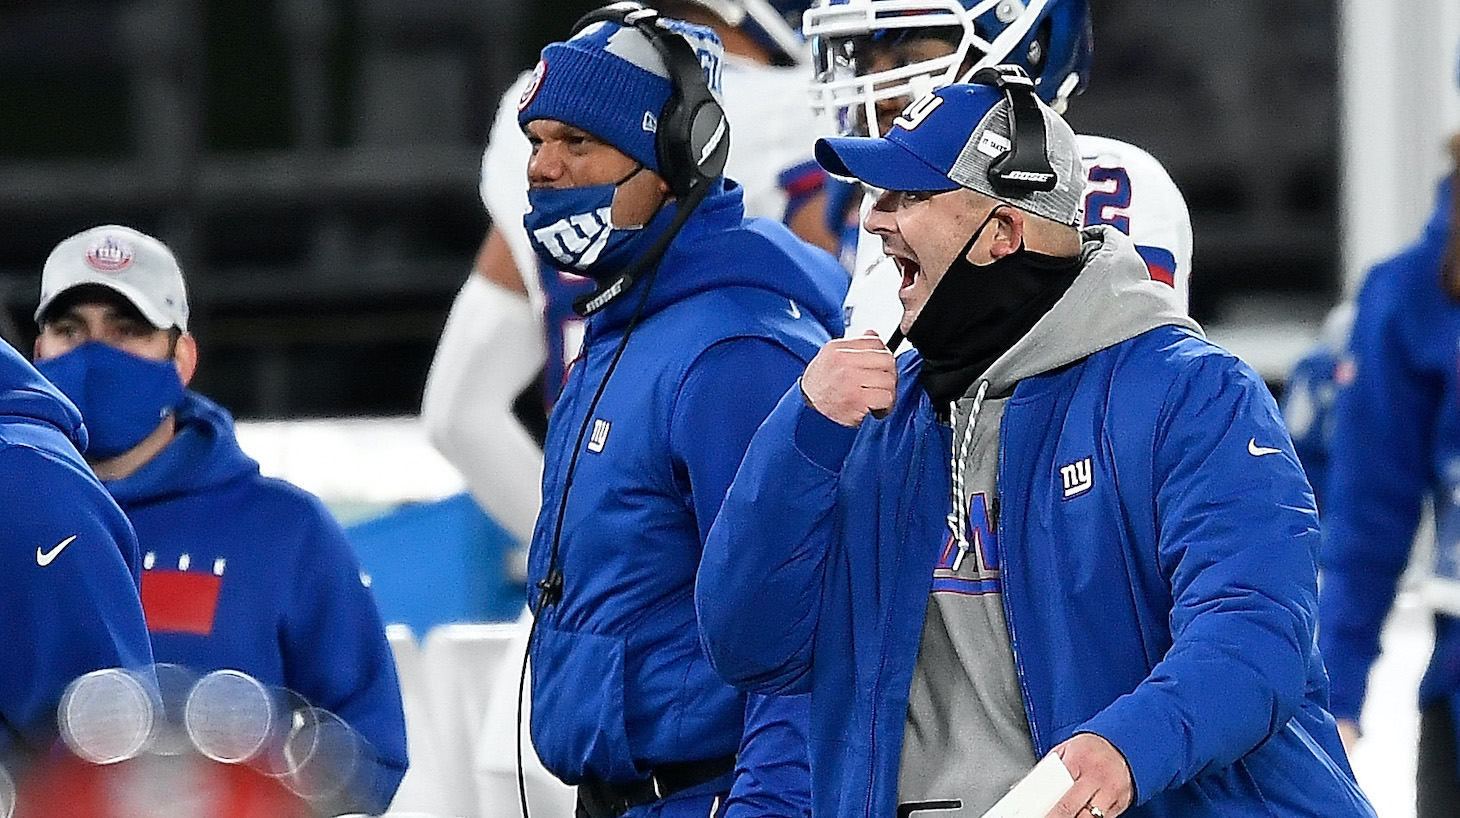 EAST RUTHERFORD, NEW JERSEY - NOVEMBER 02: Head coach Joe Judge of the New York Giants reacts during the first half against the Tampa Bay Buccaneers at MetLife Stadium on November 02, 2020 in East Rutherford, New Jersey. (Photo by Sarah Stier/Getty Images)